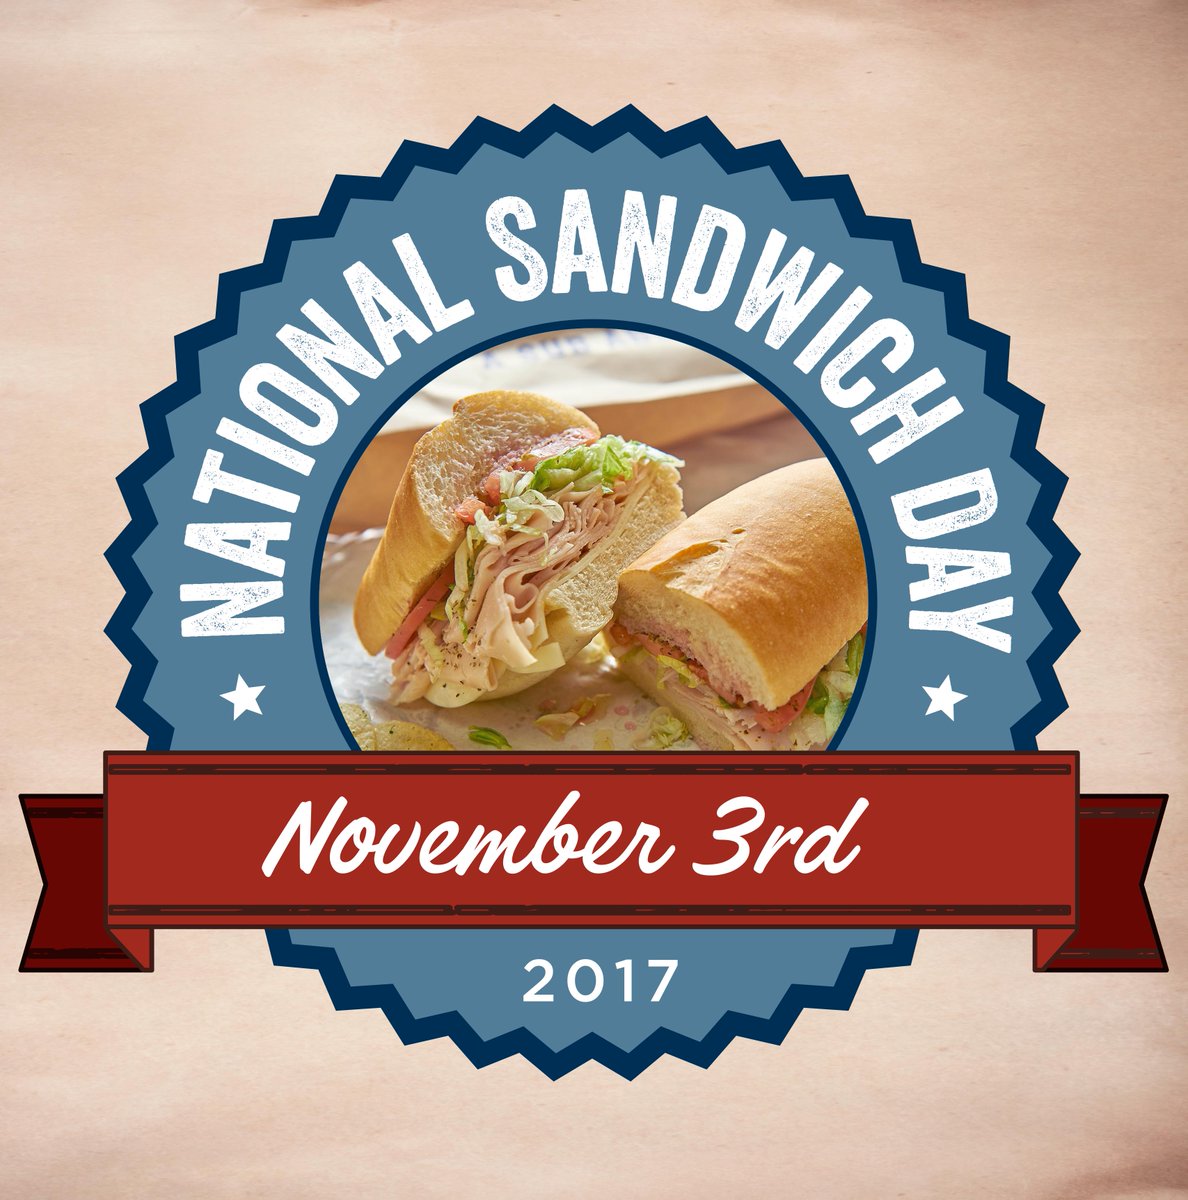 jersey mike's national sandwich day